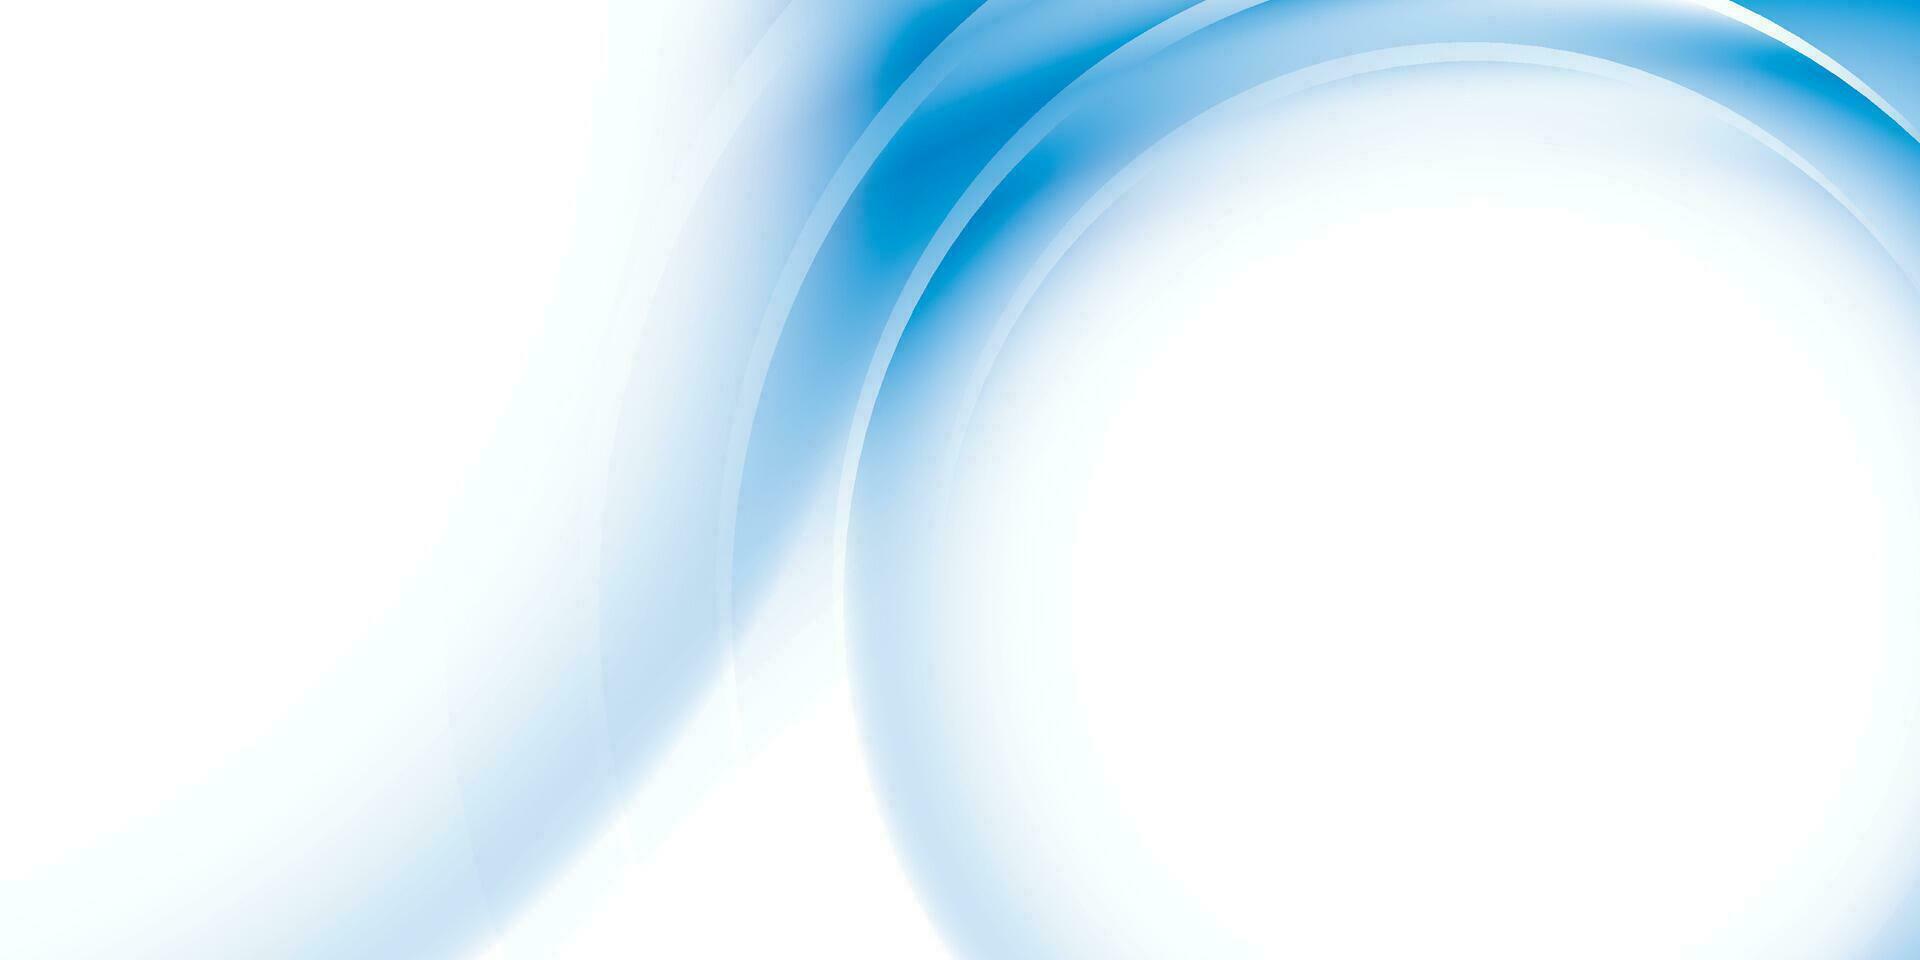 Abstract geometric white and blue color background with round shape. Vector illustration.